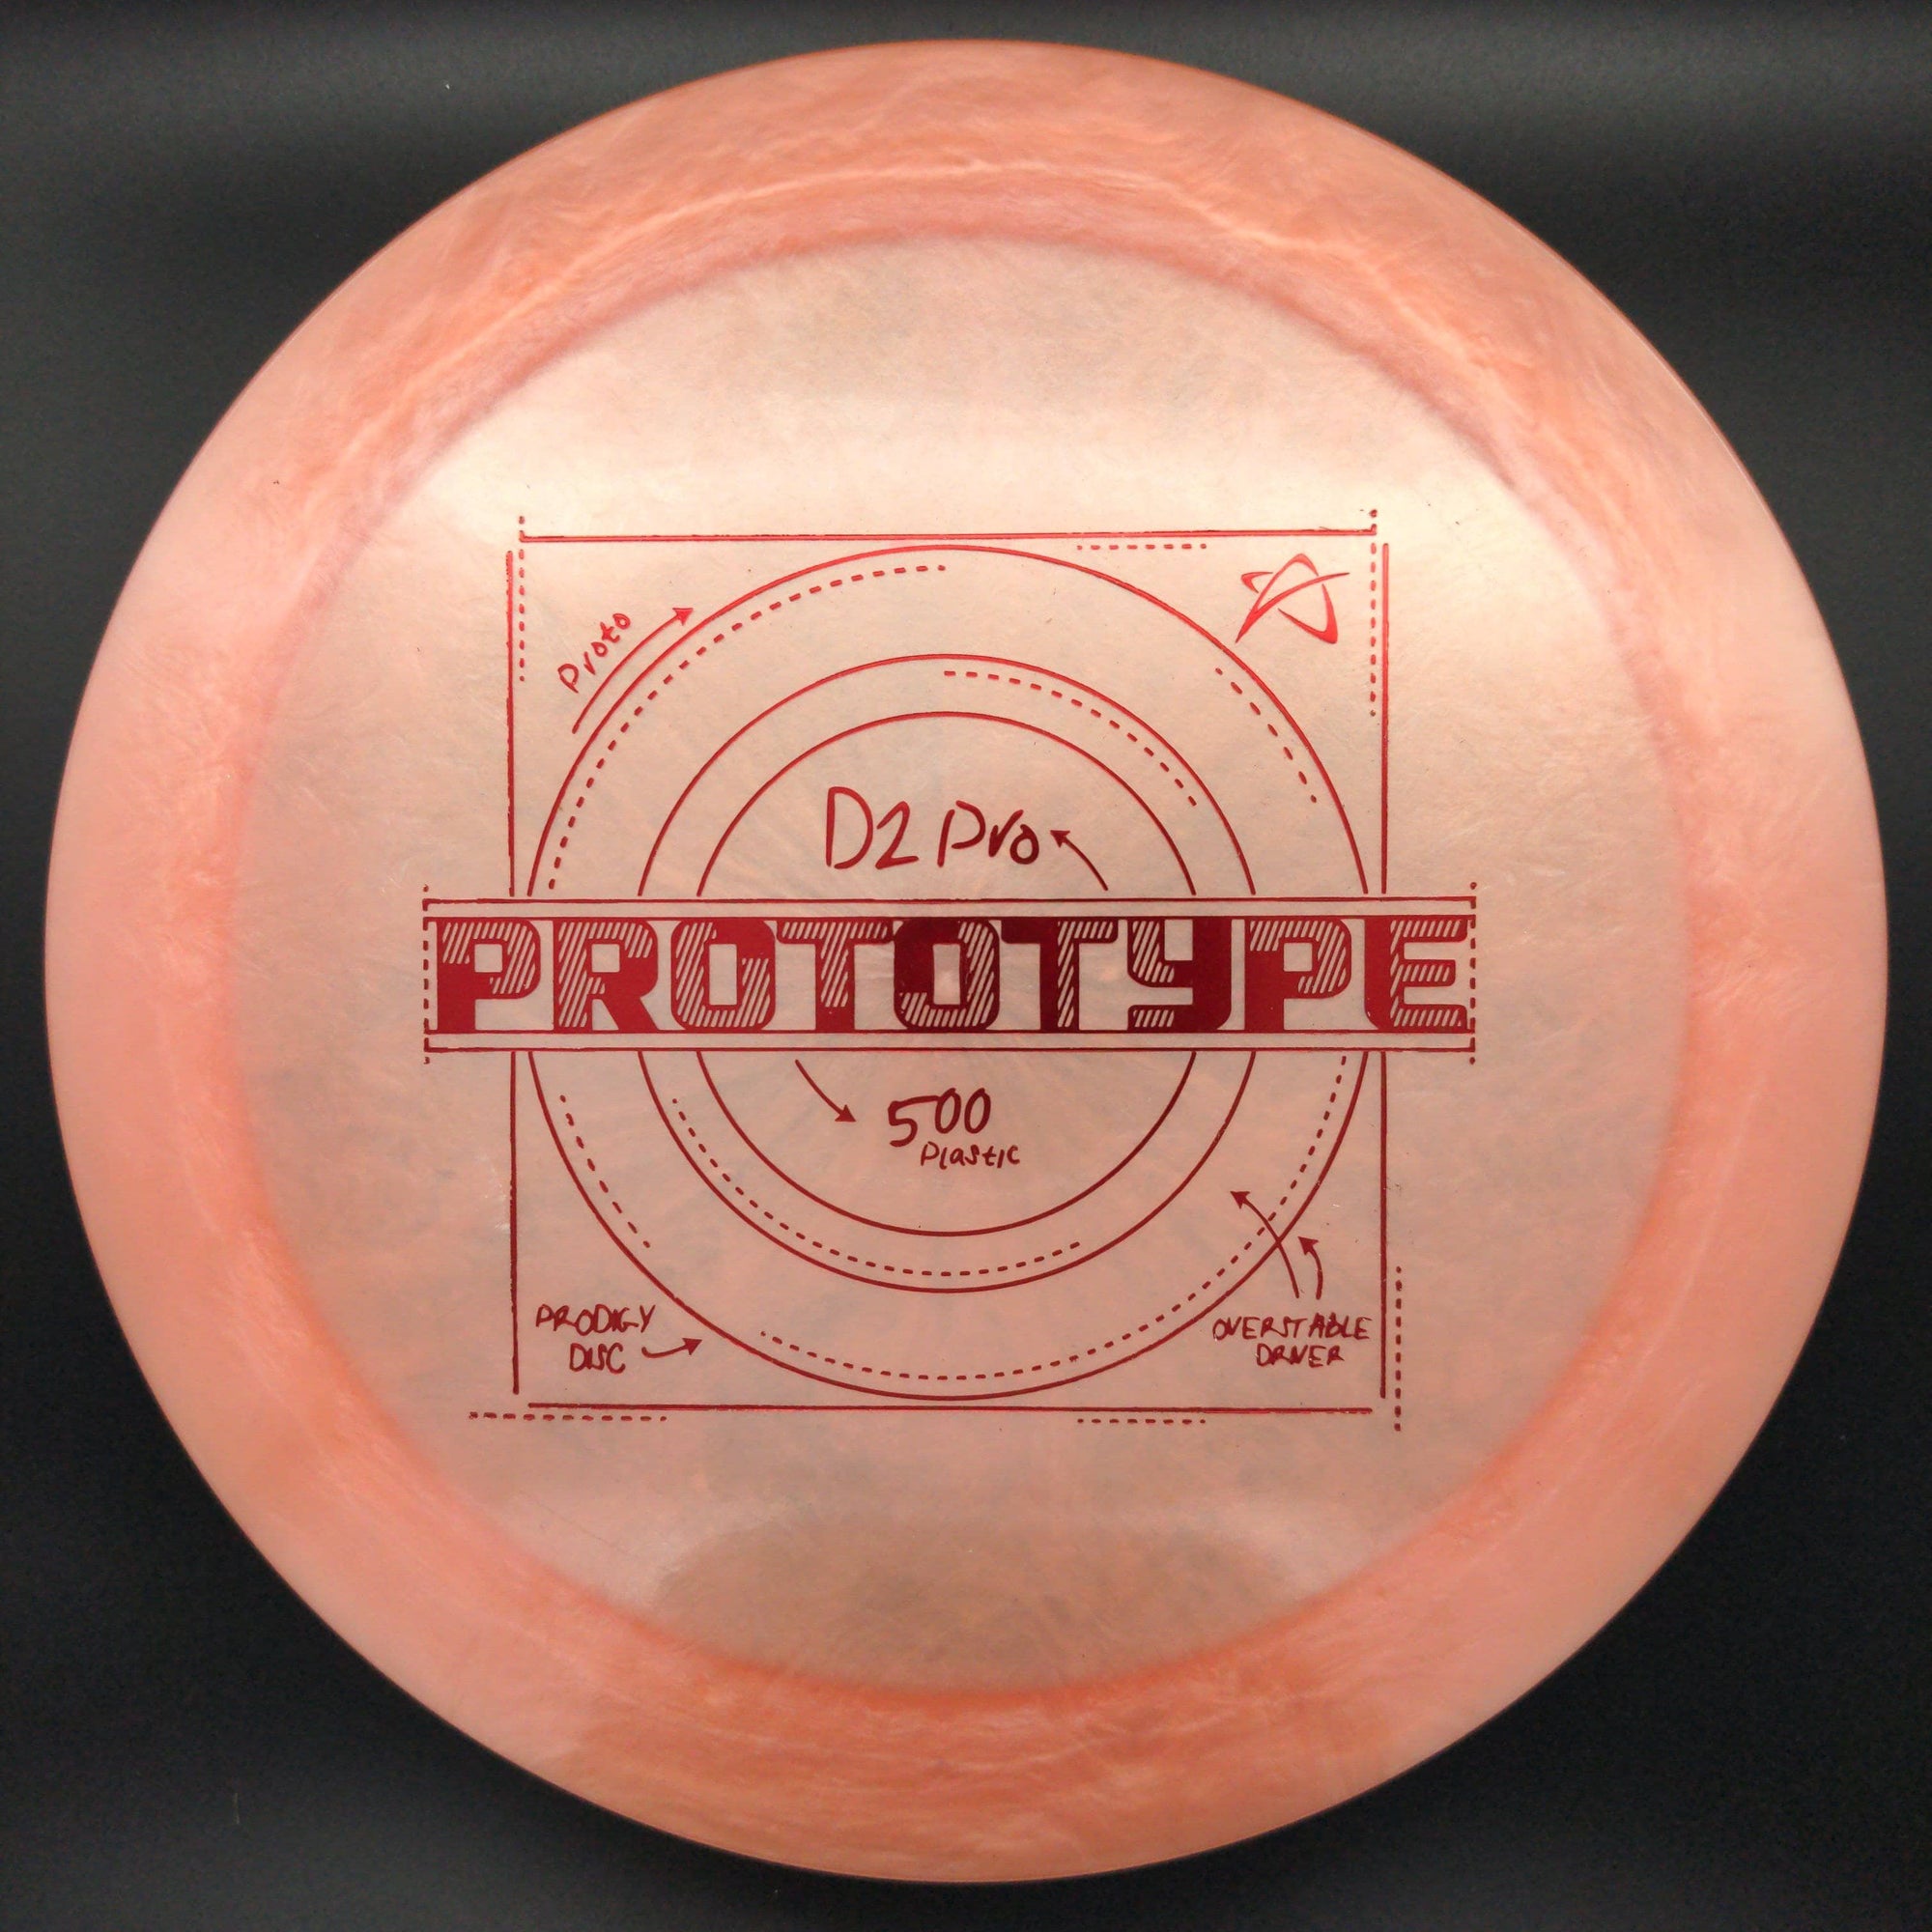 Prodigy Distance Driver Orange Red Stamp 174g D2 Pro, 500, Prototype